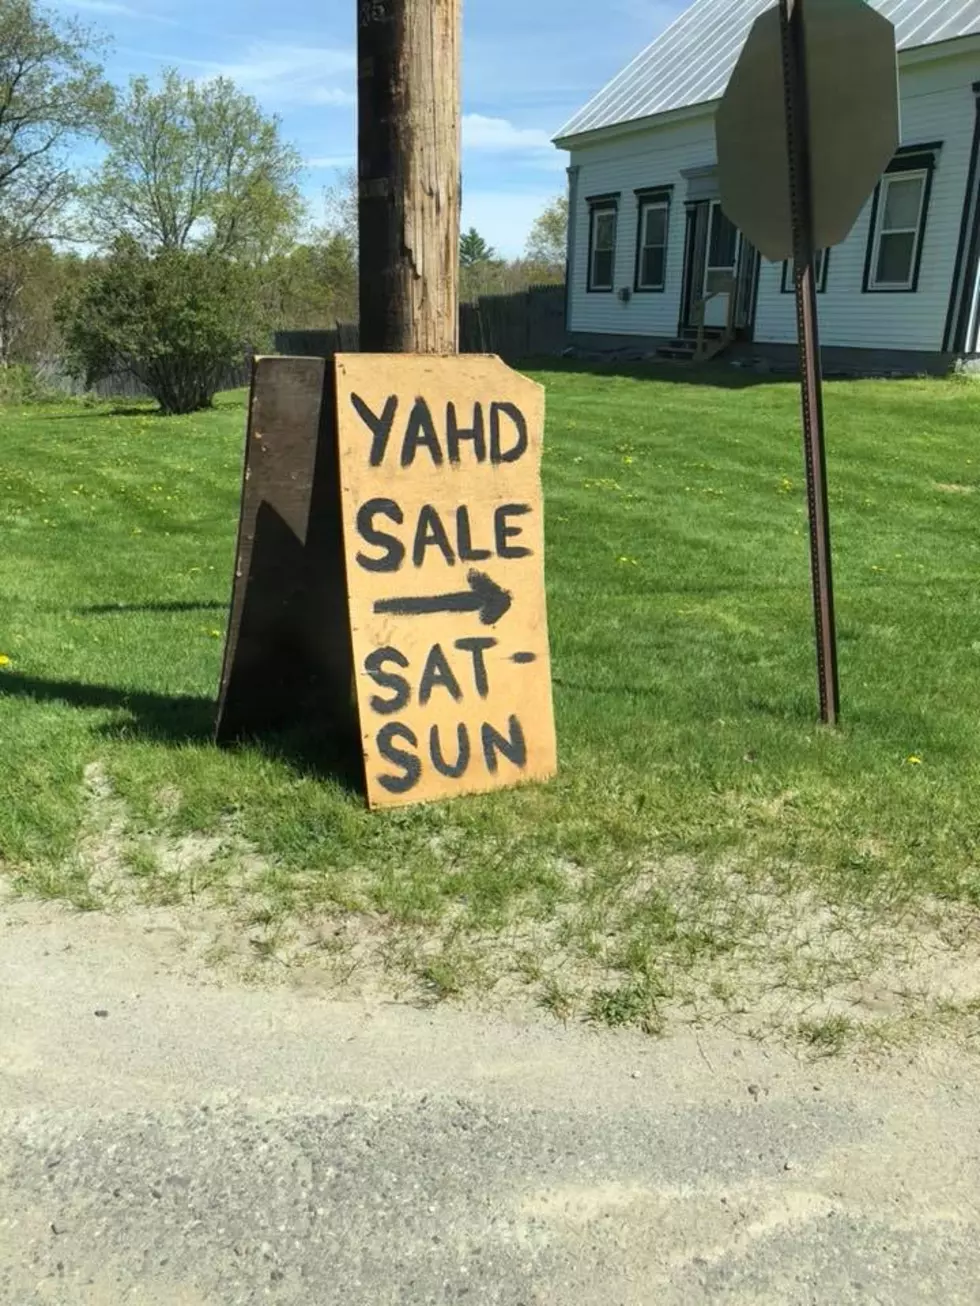 Maine’s Town-Wide Yard Sales Scheduled So Far for 2022